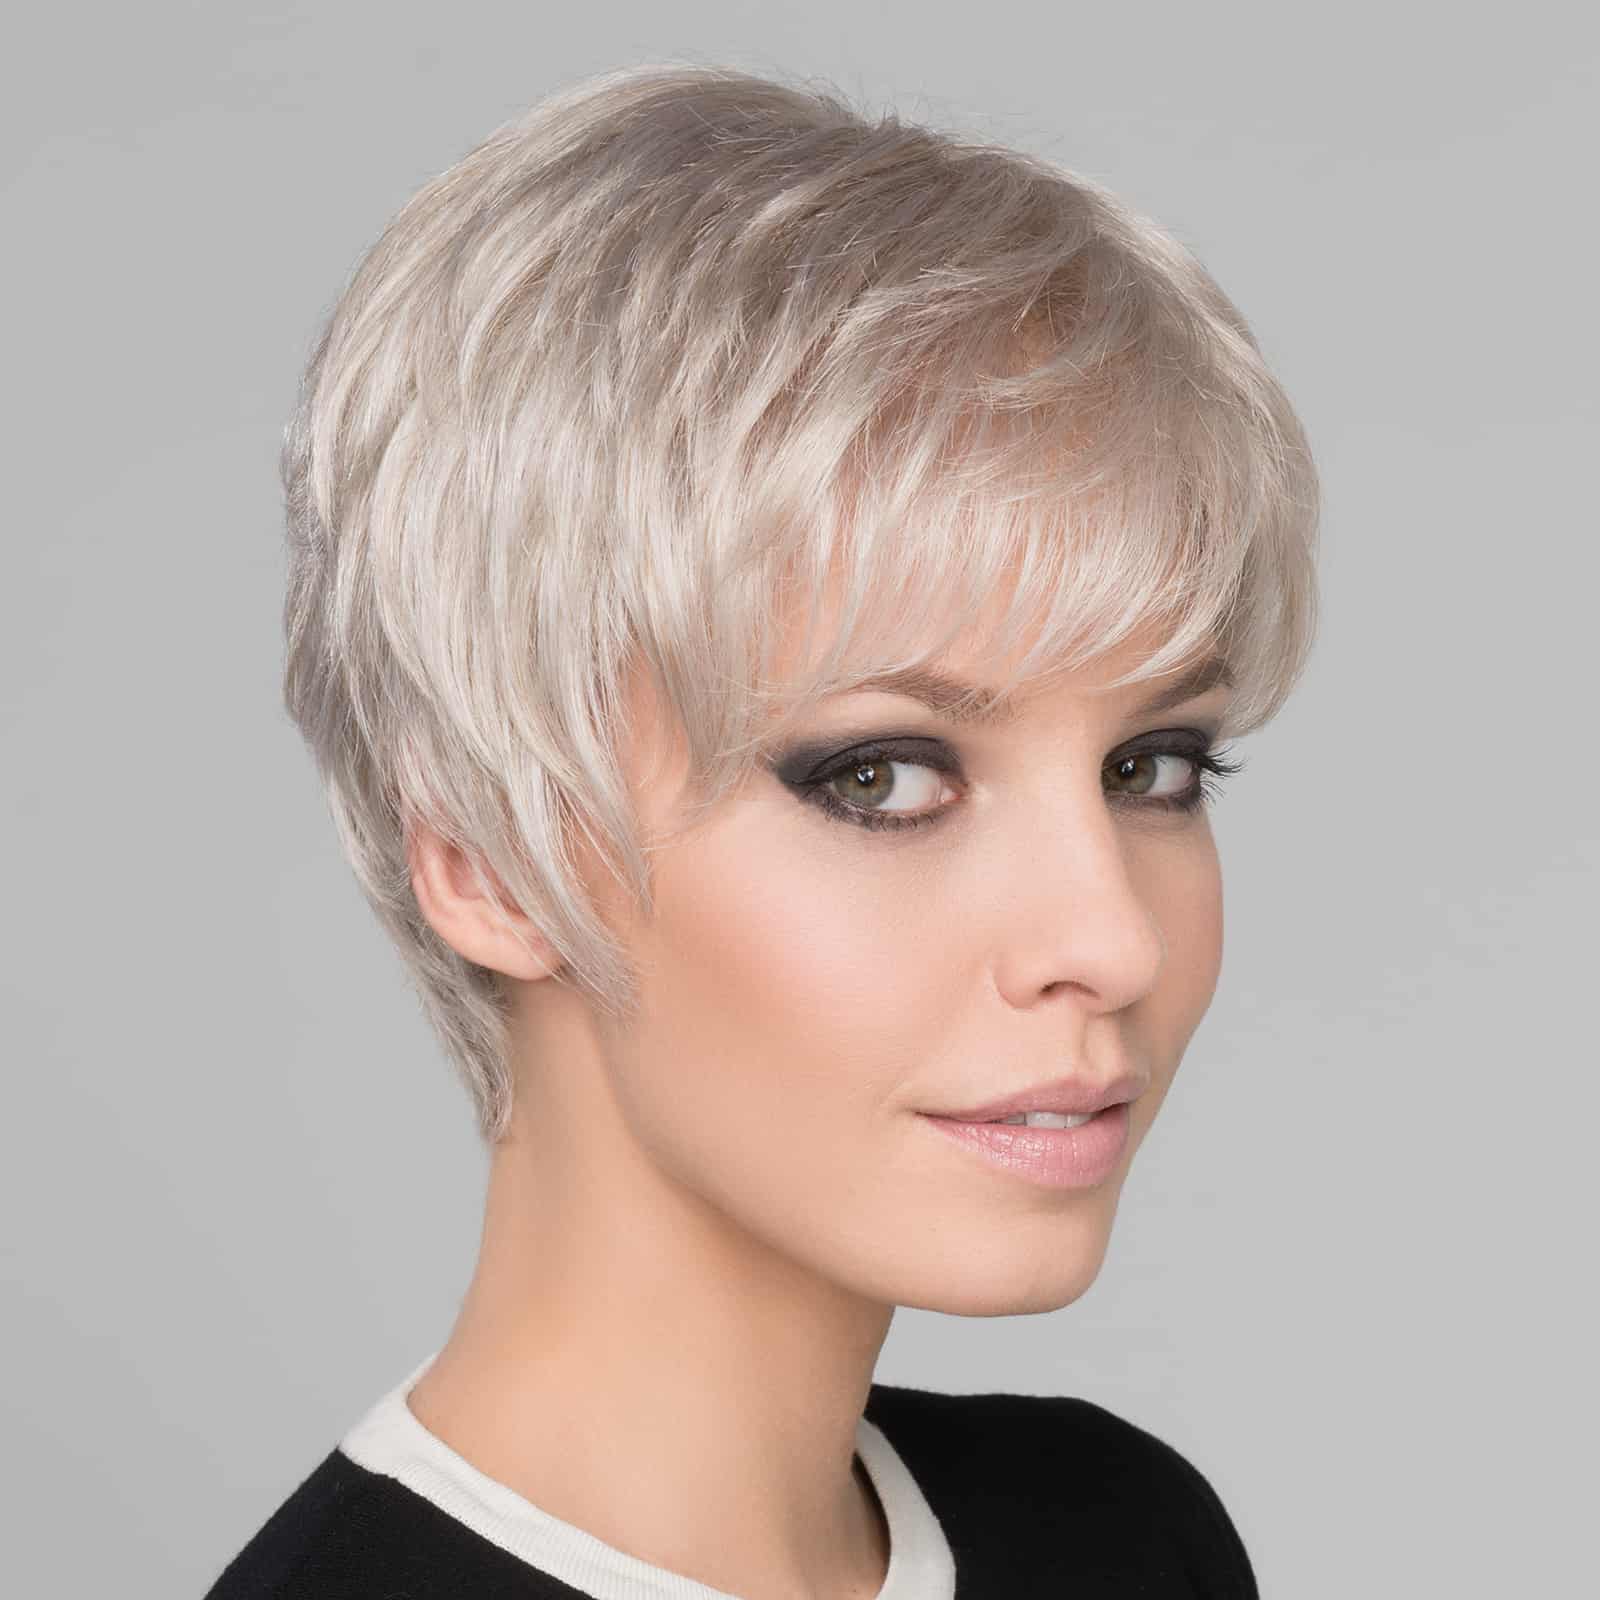 Light Mono is a hand-knotted monofilament to create the appearance of natural hair growth wherever you part the hair